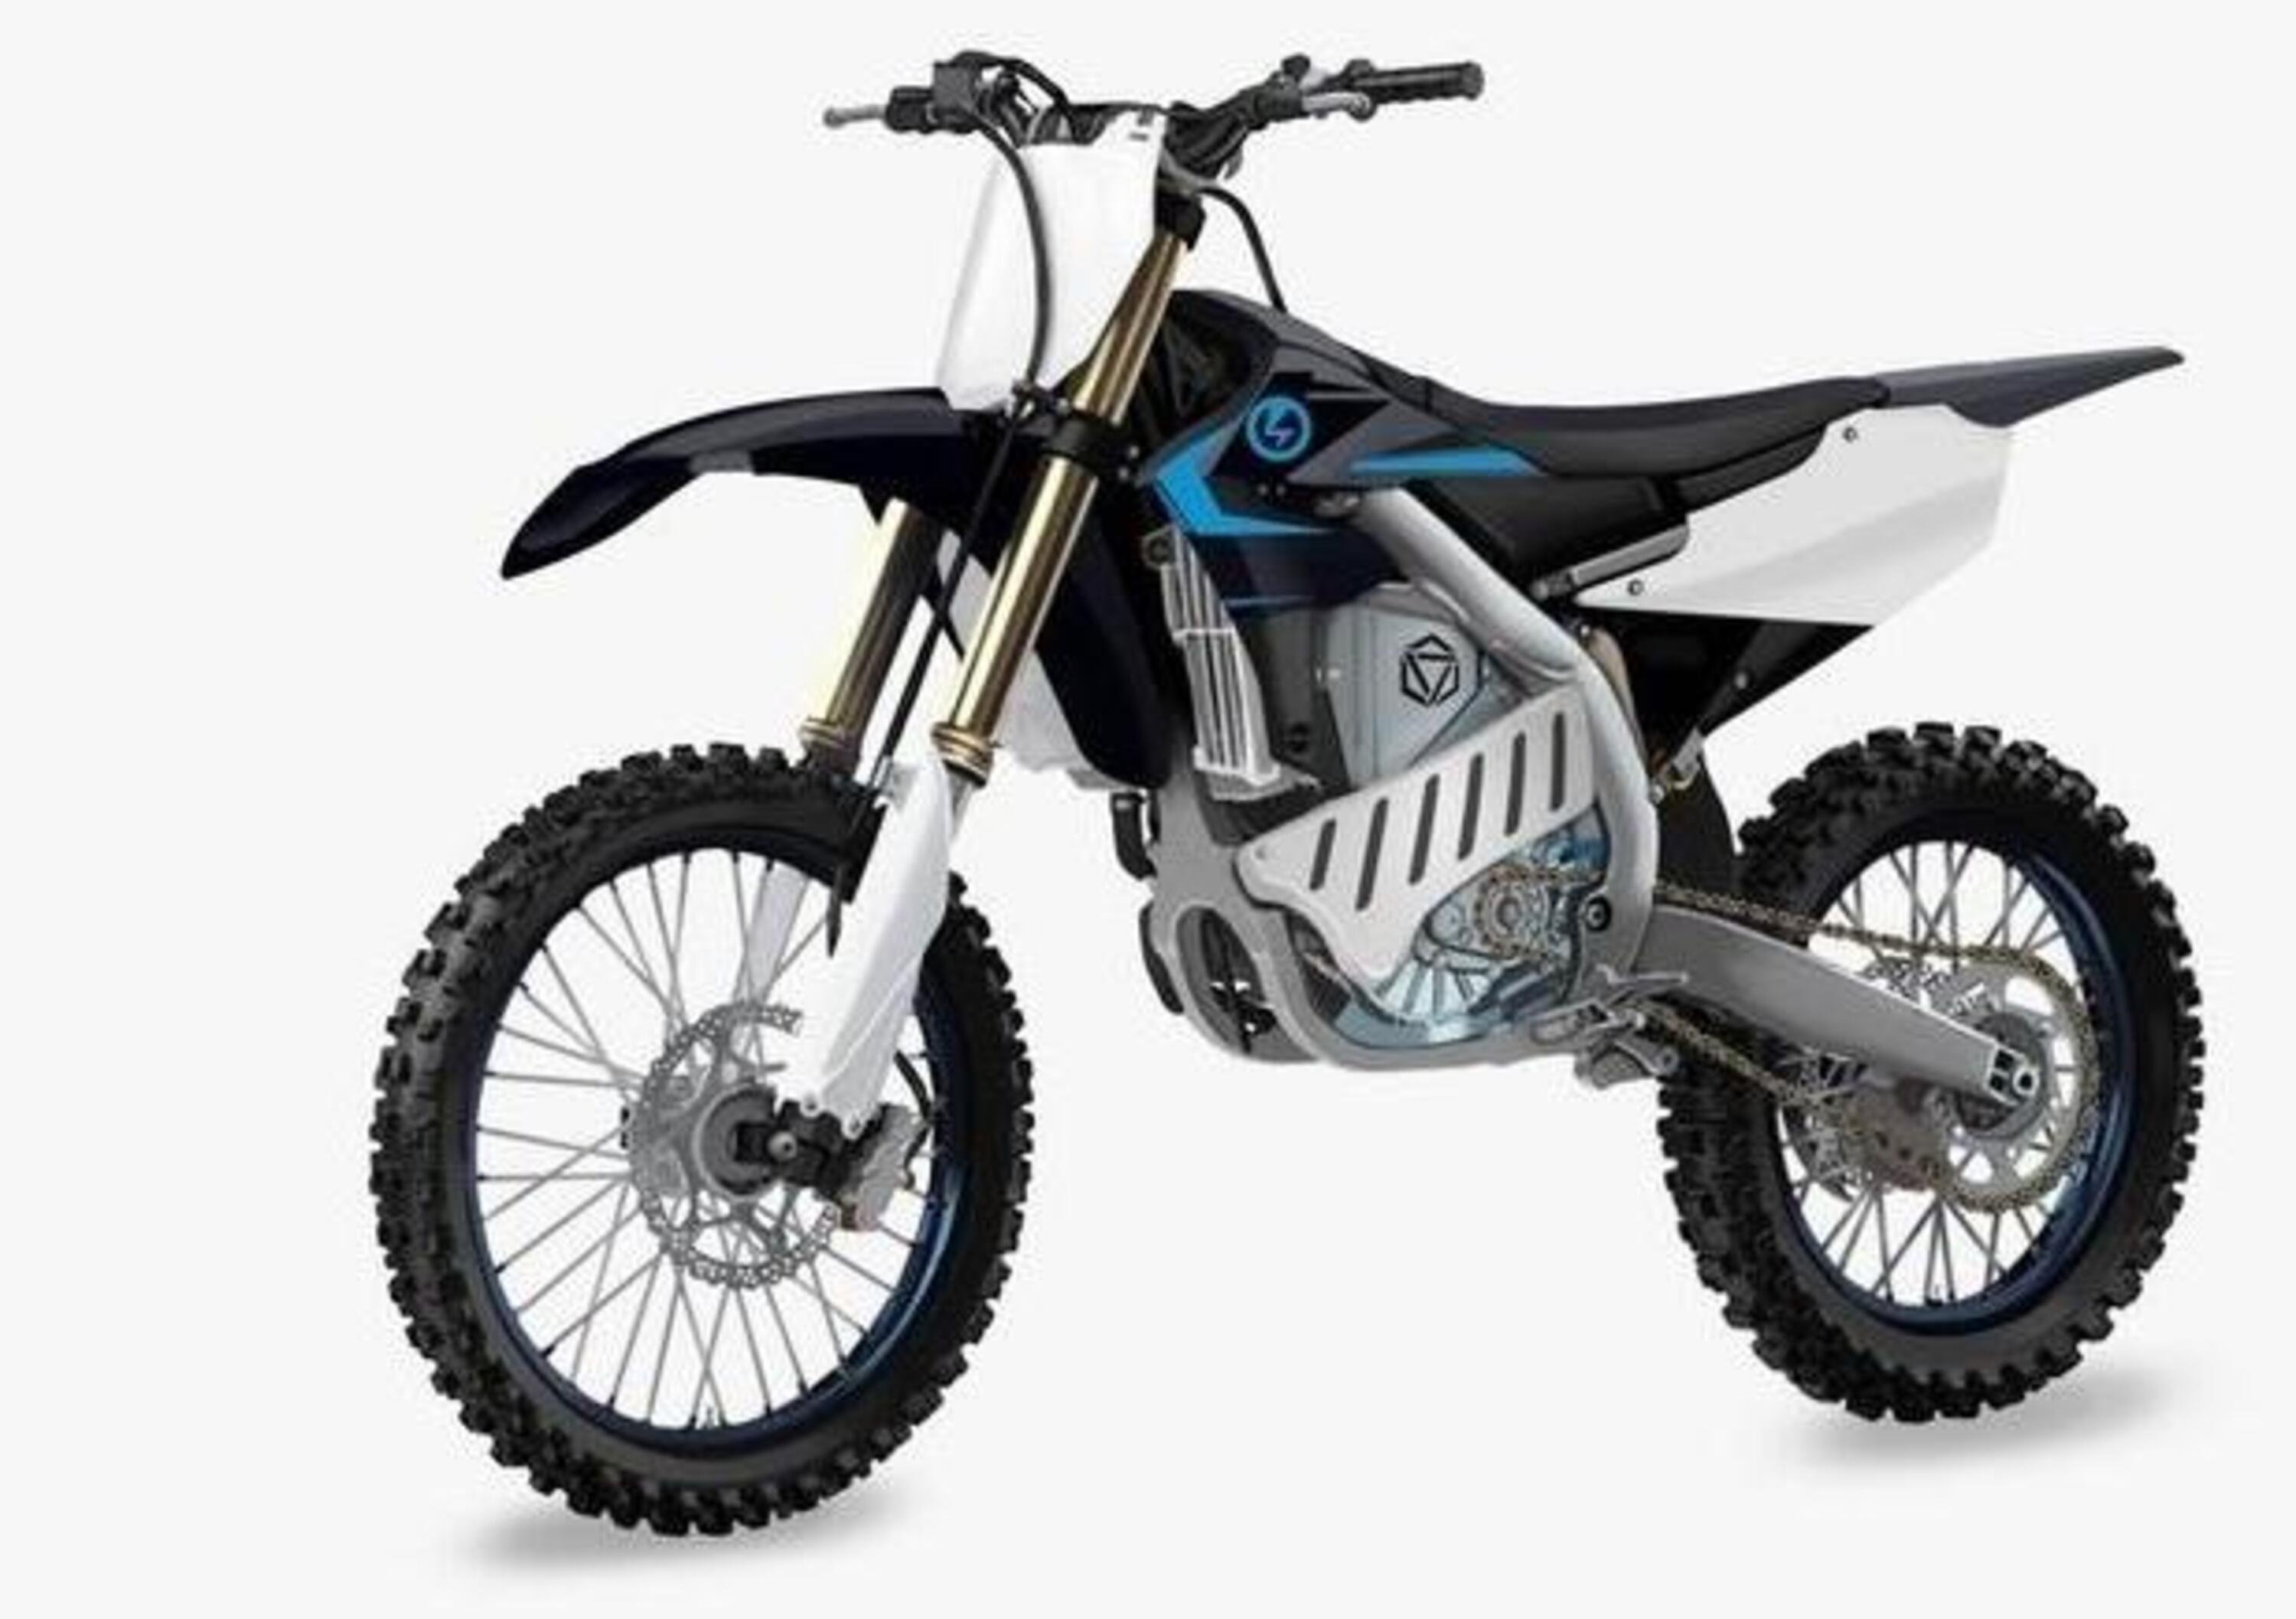 Yamaha MX elettrica in arrivo quest&#039;anno?